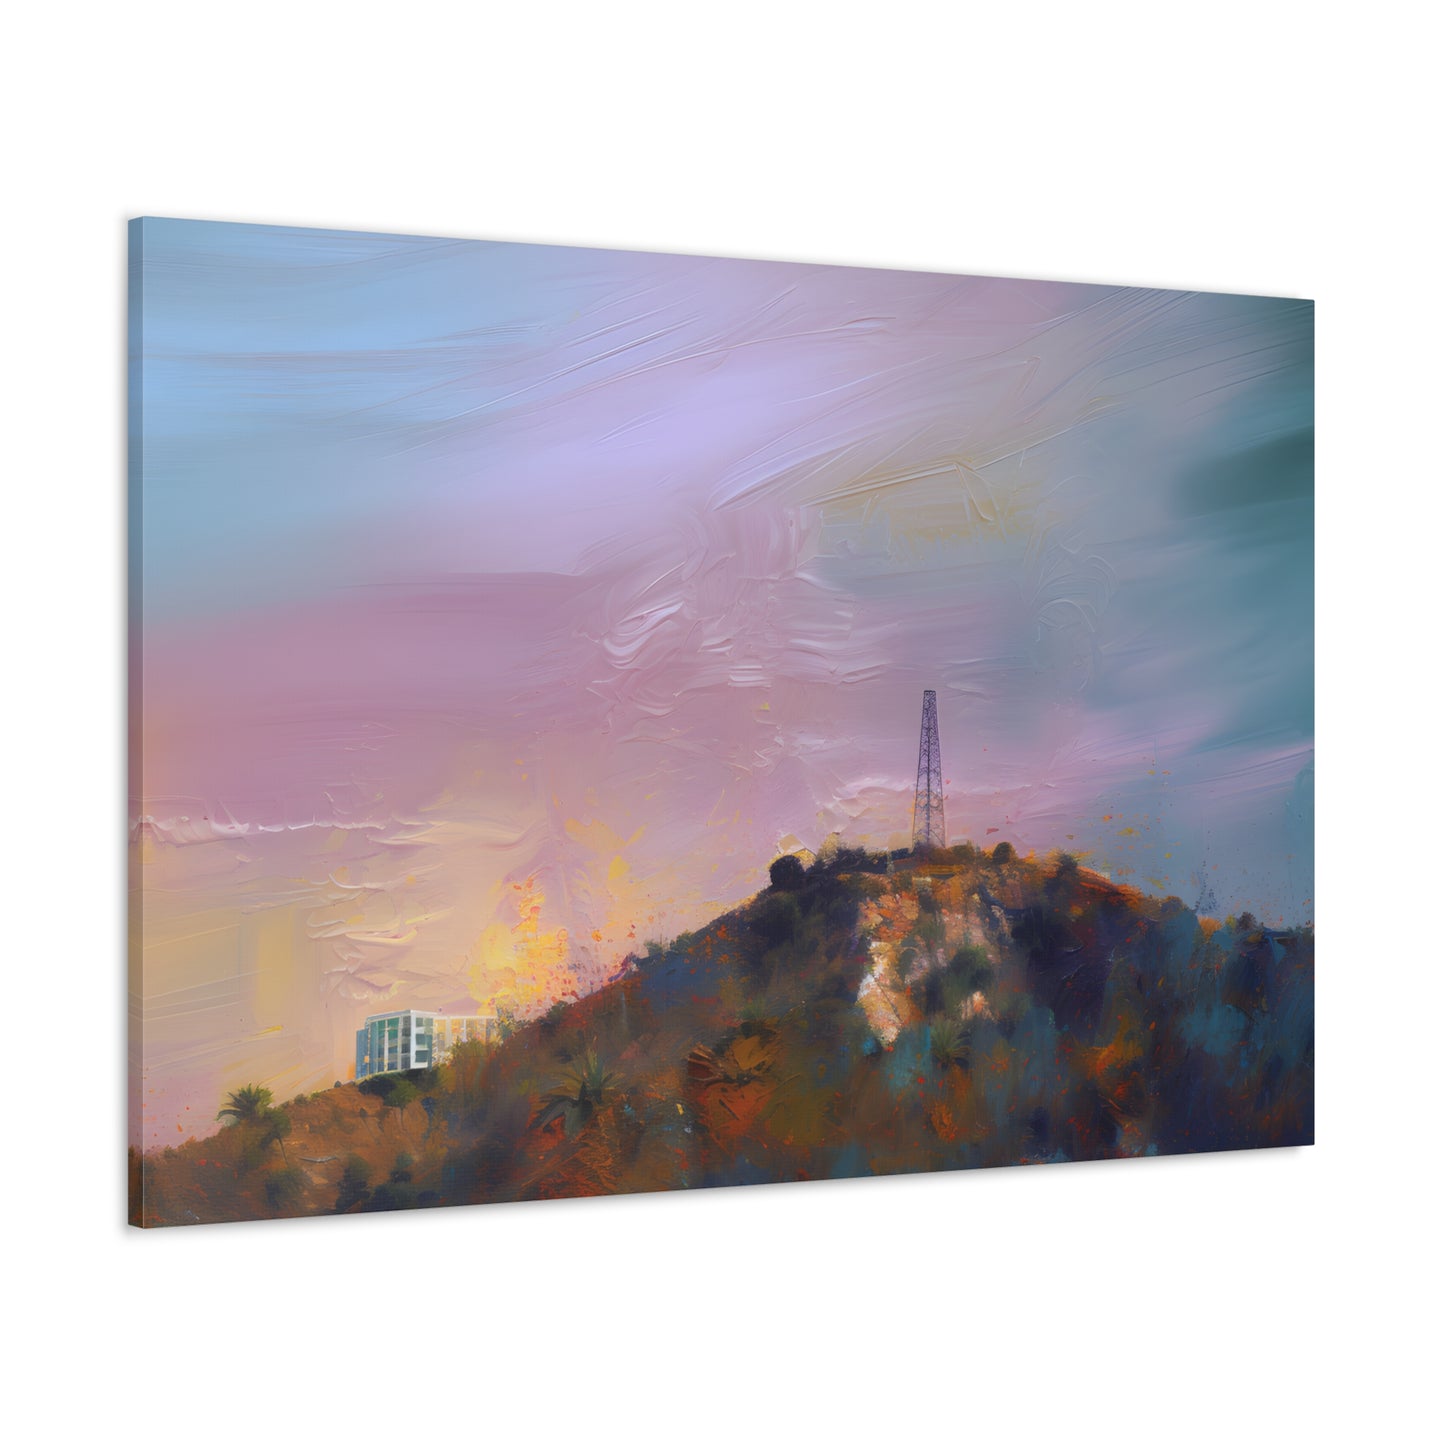 At Home On A Hill (Pastel Sky)